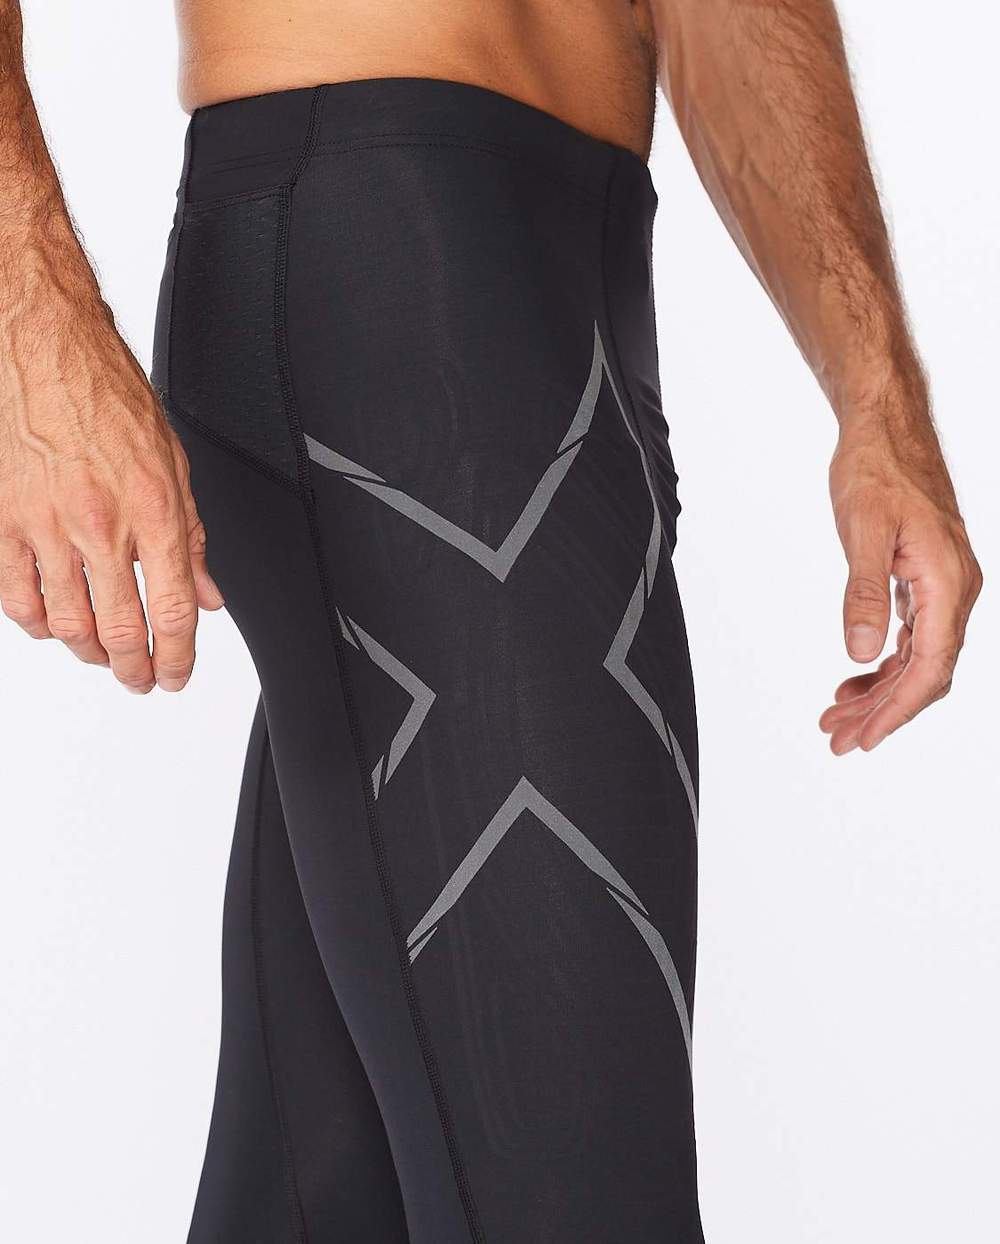 2XU Men's Force Light Speed Compression Shorts